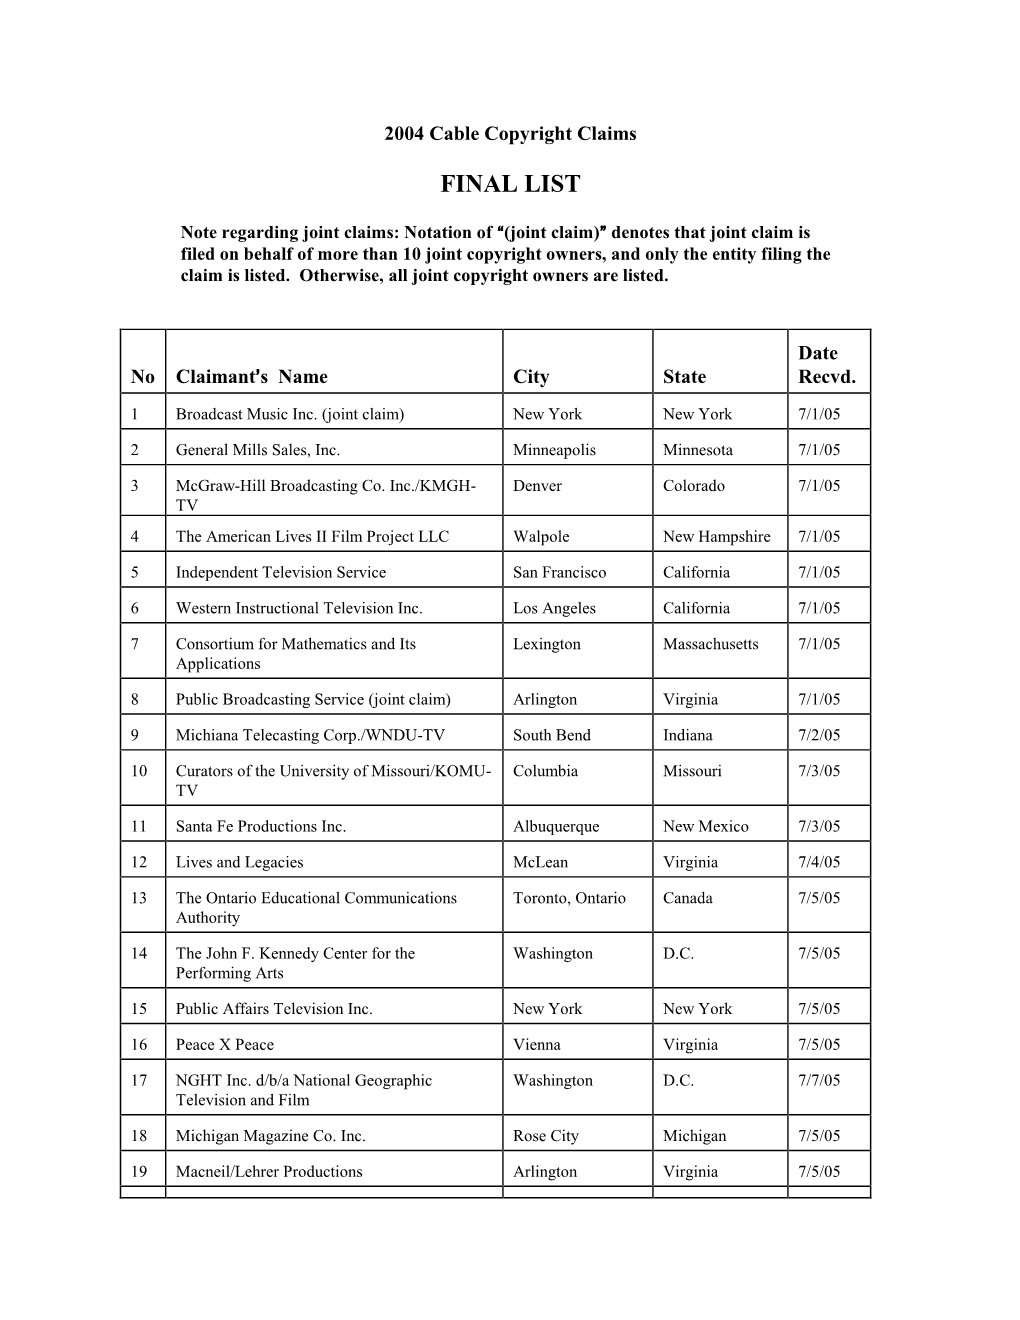 2004 Cable Copyright Claims Final List